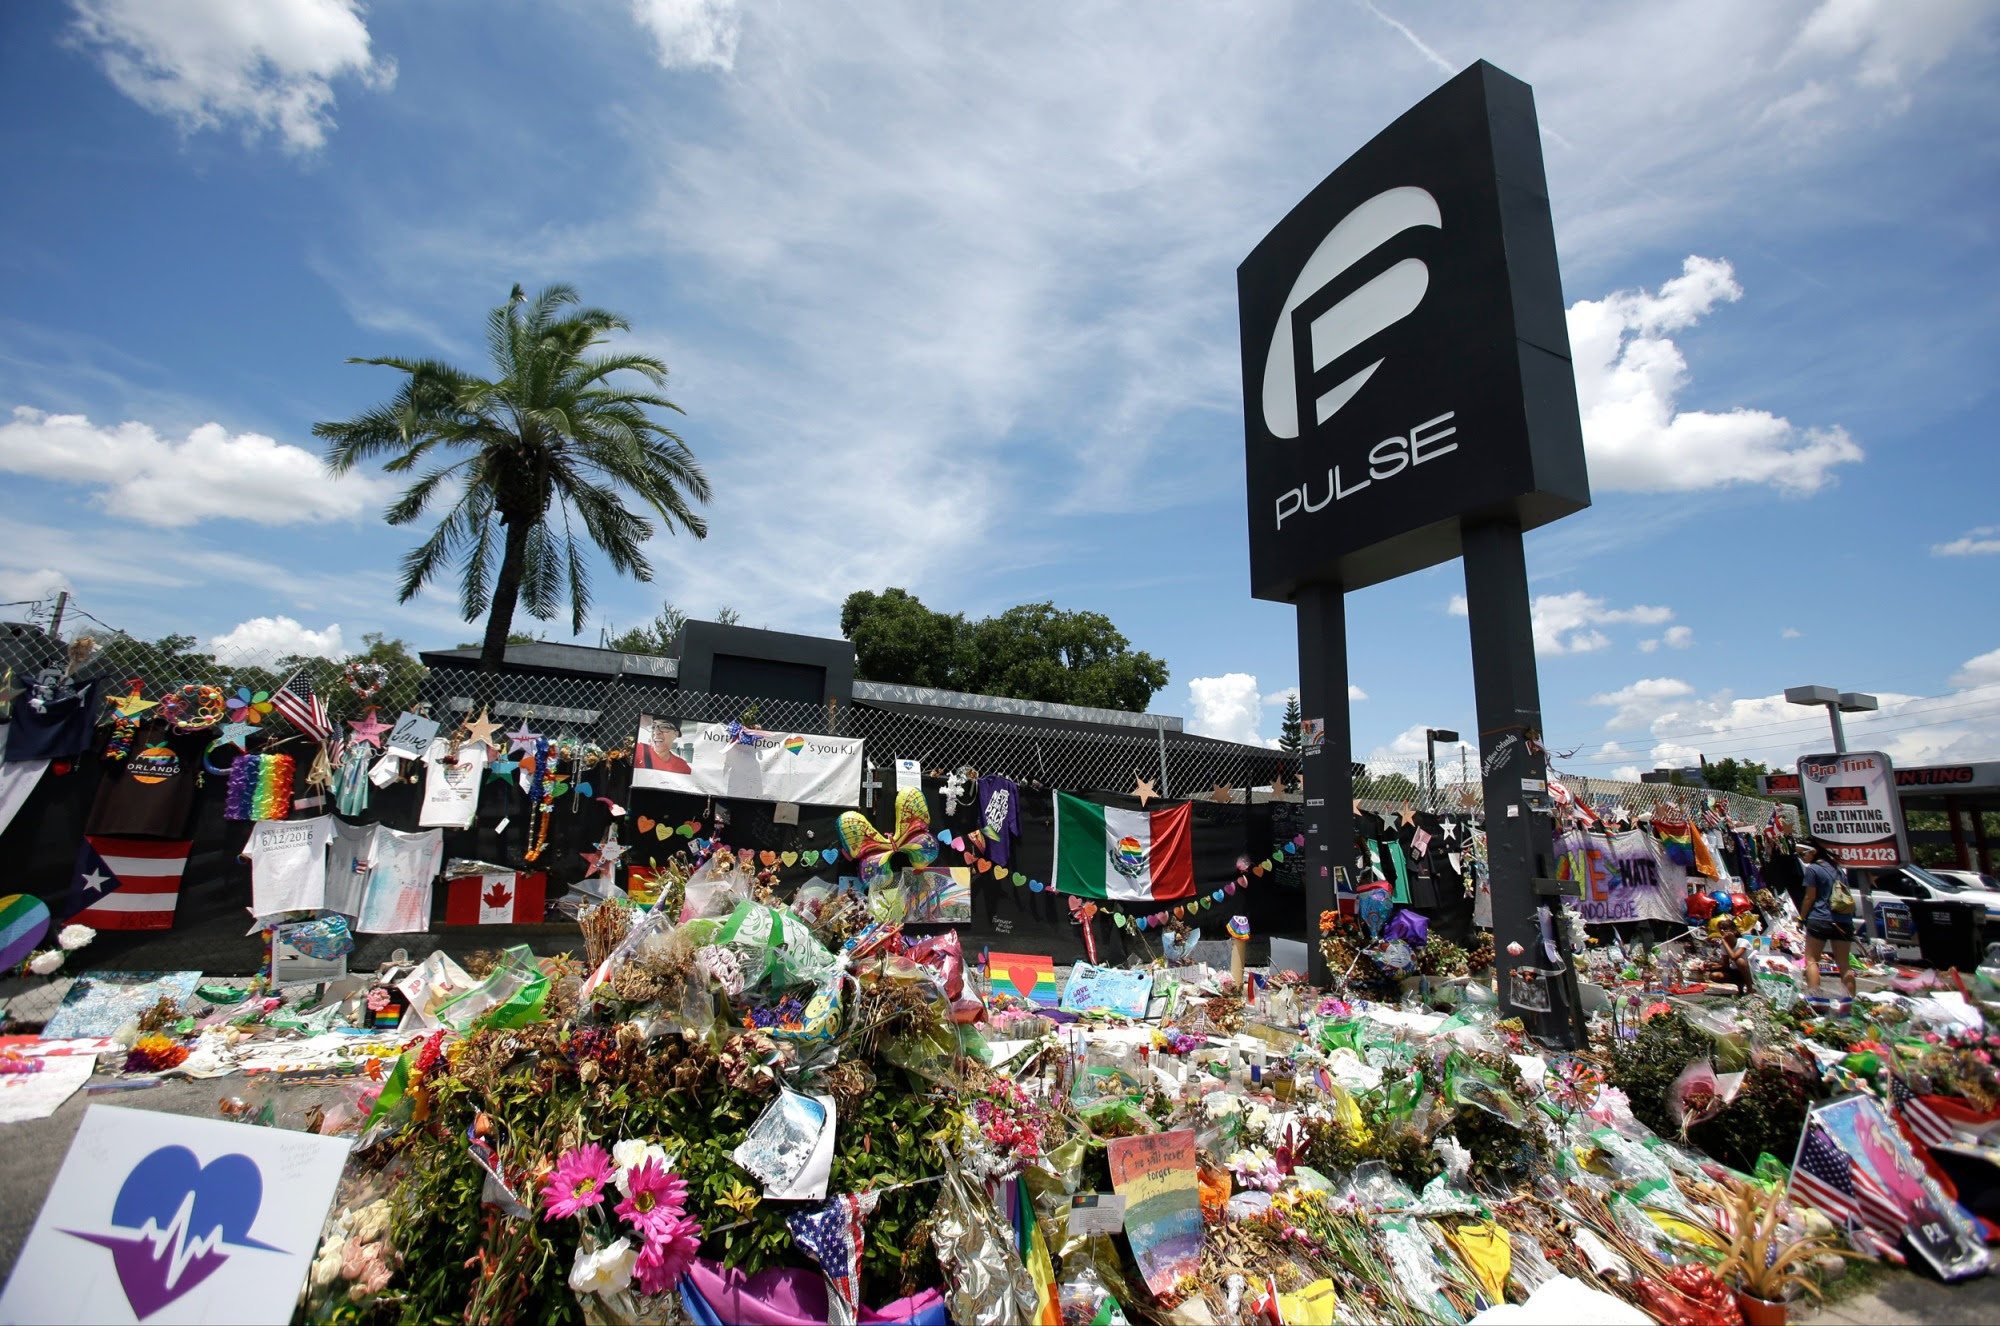 Hundreds of memorial items left outside of the Pulse nightclub in Orlando, Florida 